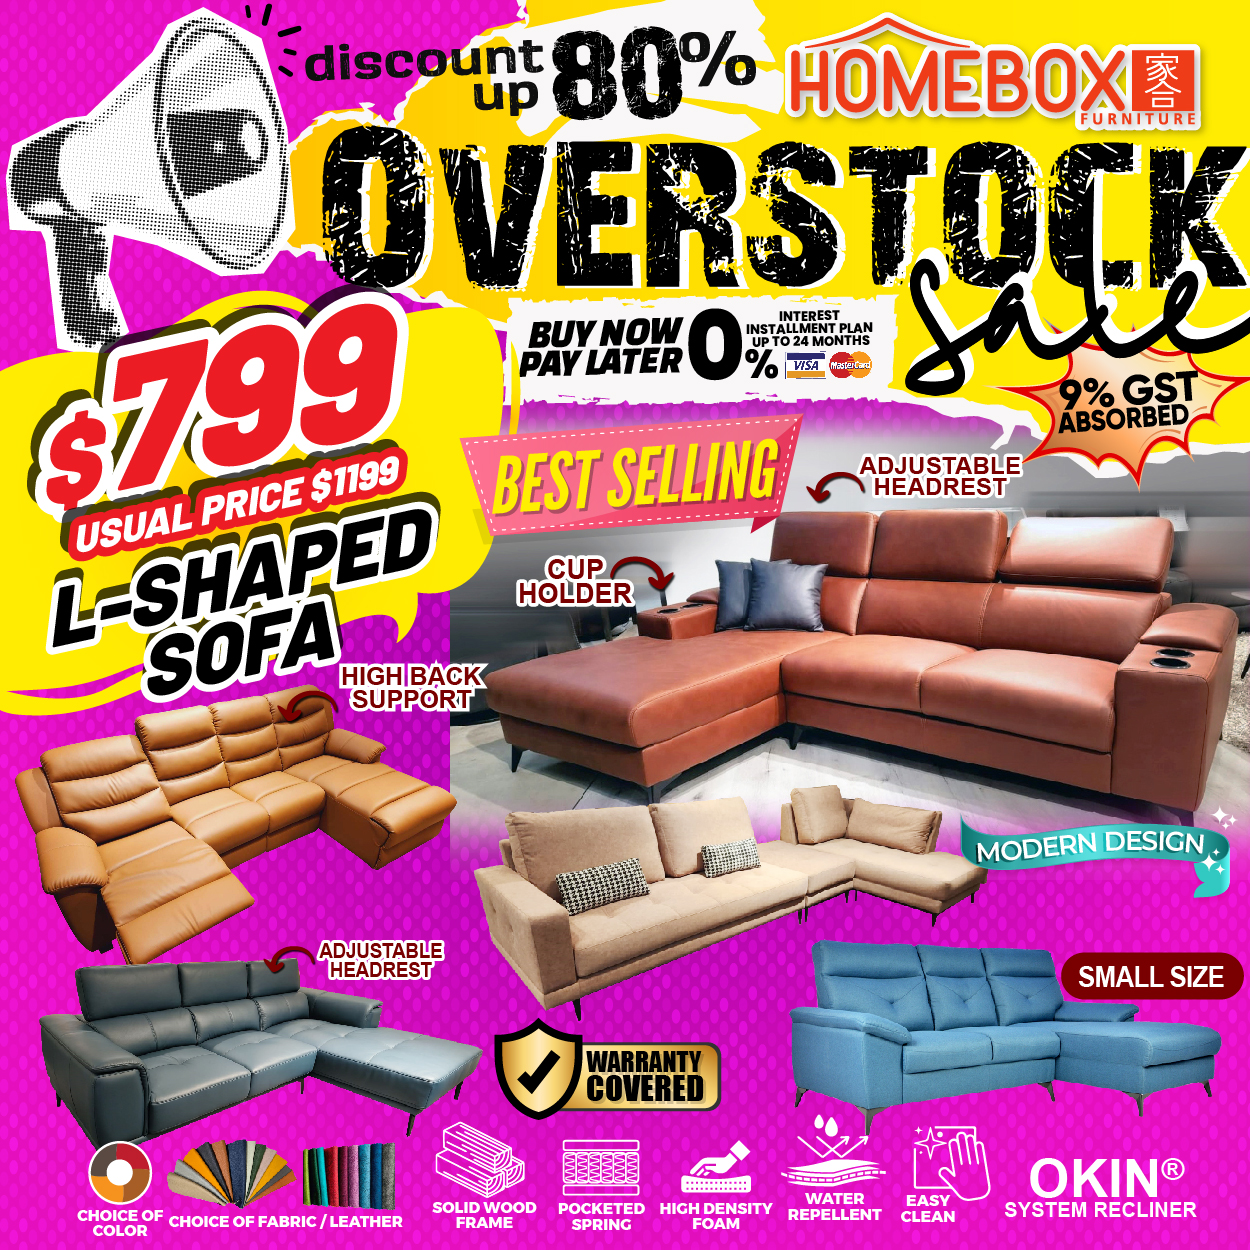 Lobang: Overstock sale at HOMEBOX Furniture @ Aljunied has furniture at up to 80% off from 17 Feb - 3 Mar 24 - 5